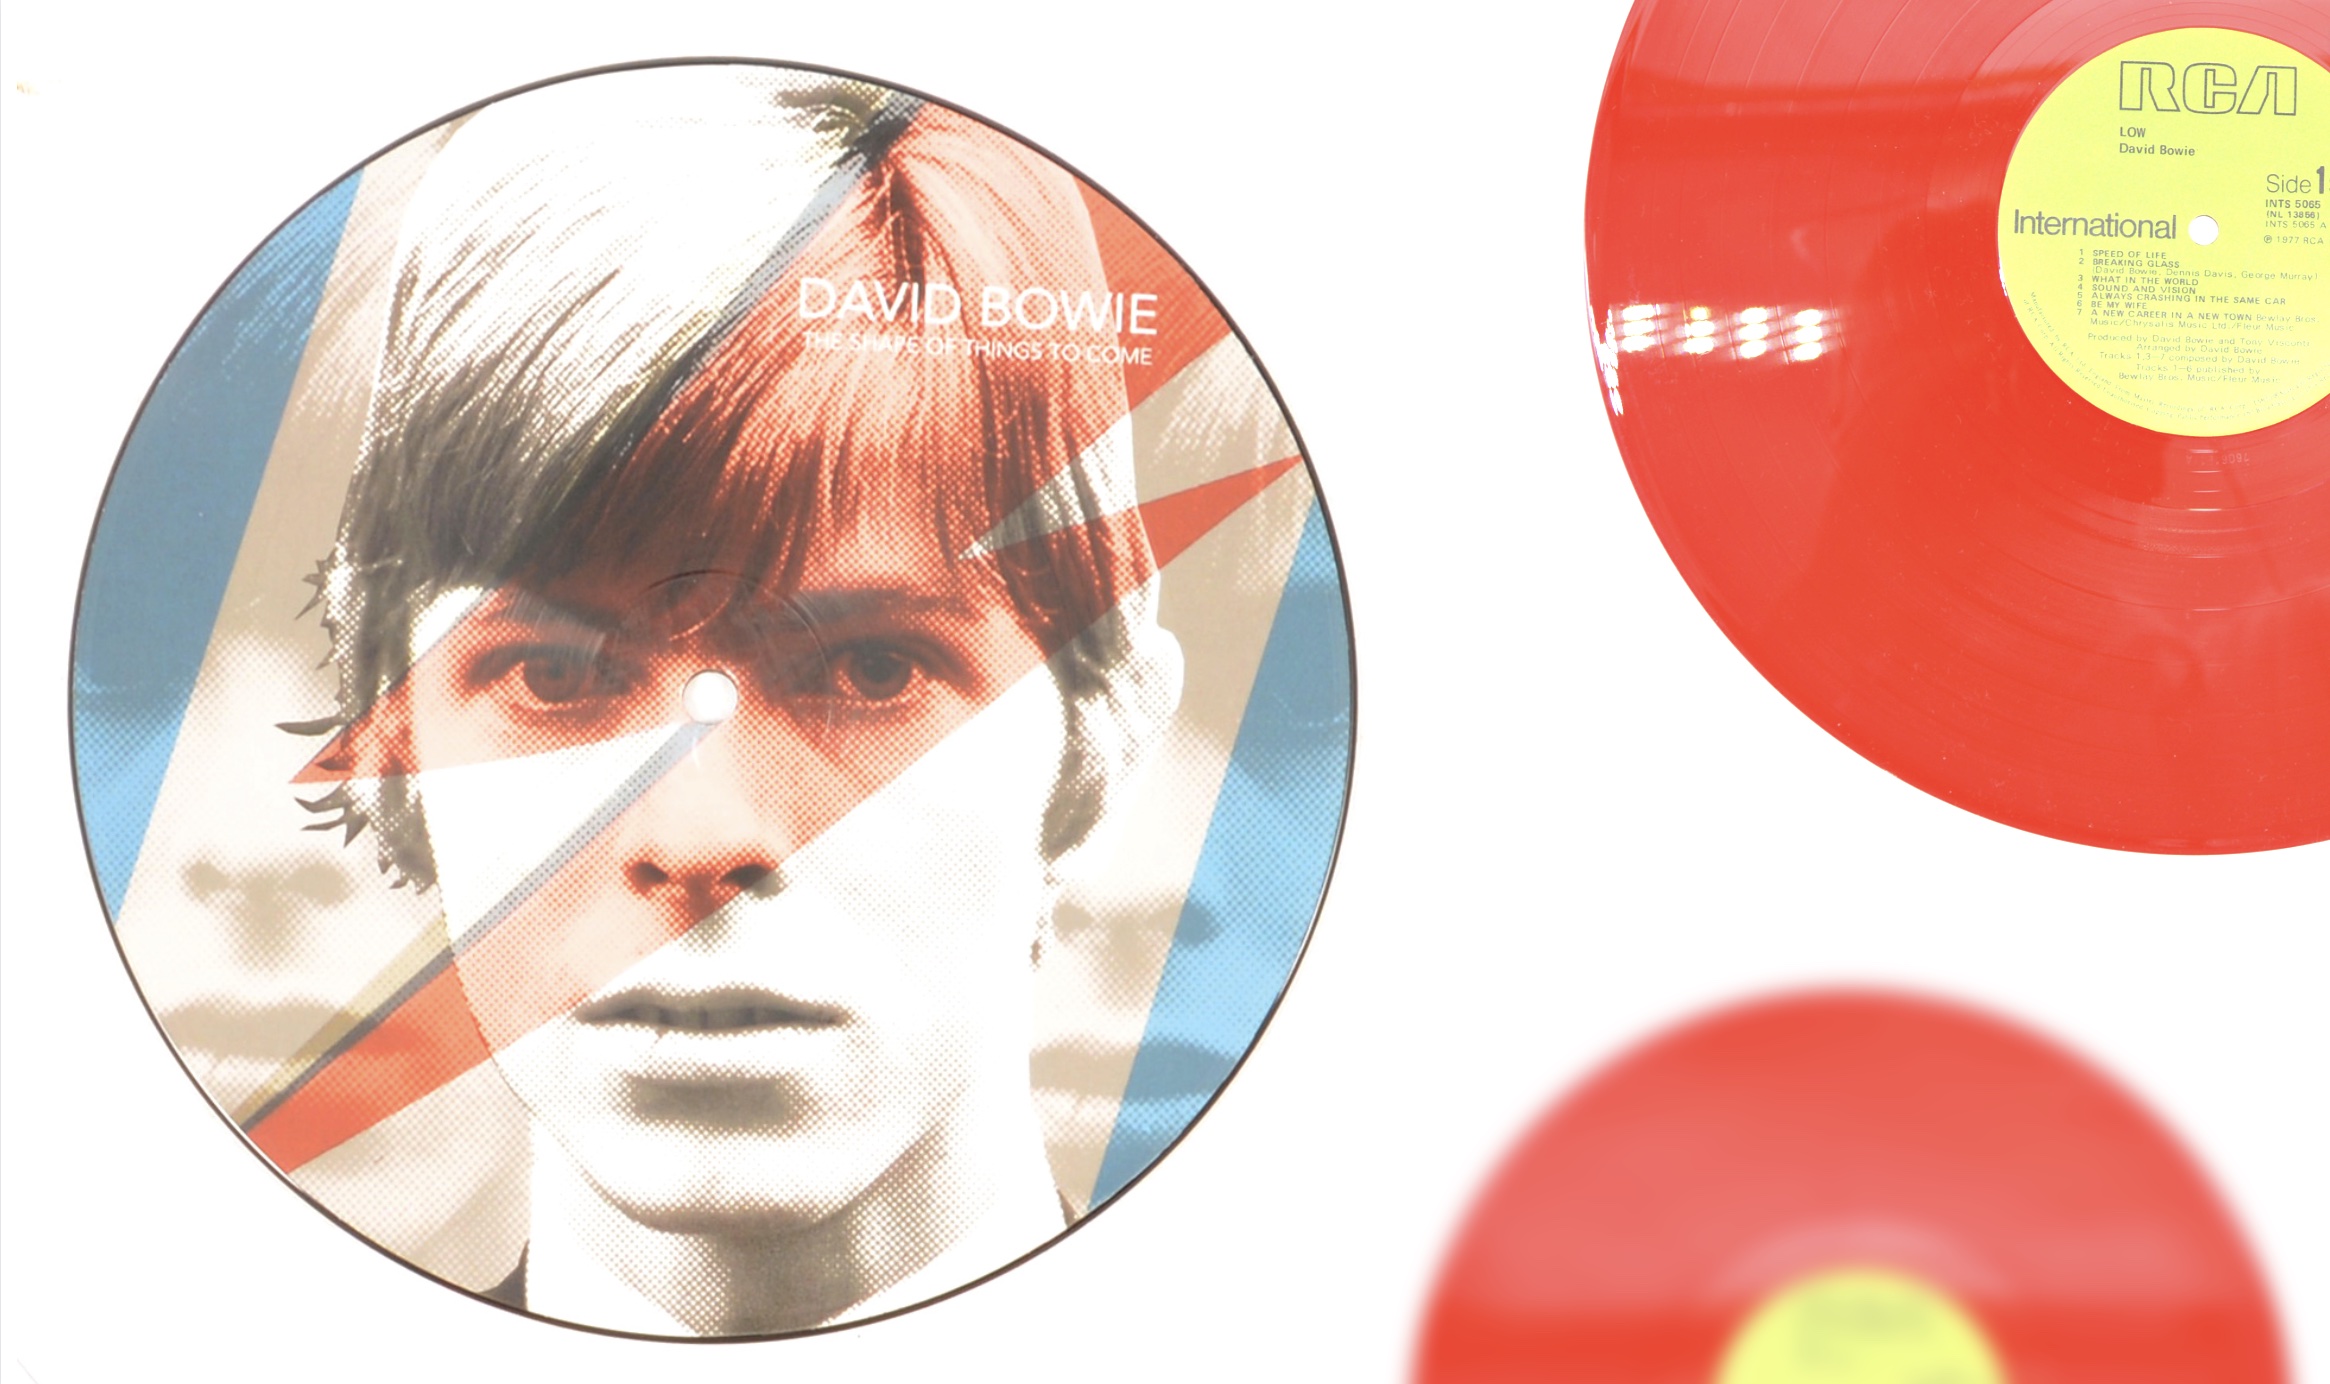 David Bowie vinyl collection set to star in sale – Antique Collecting